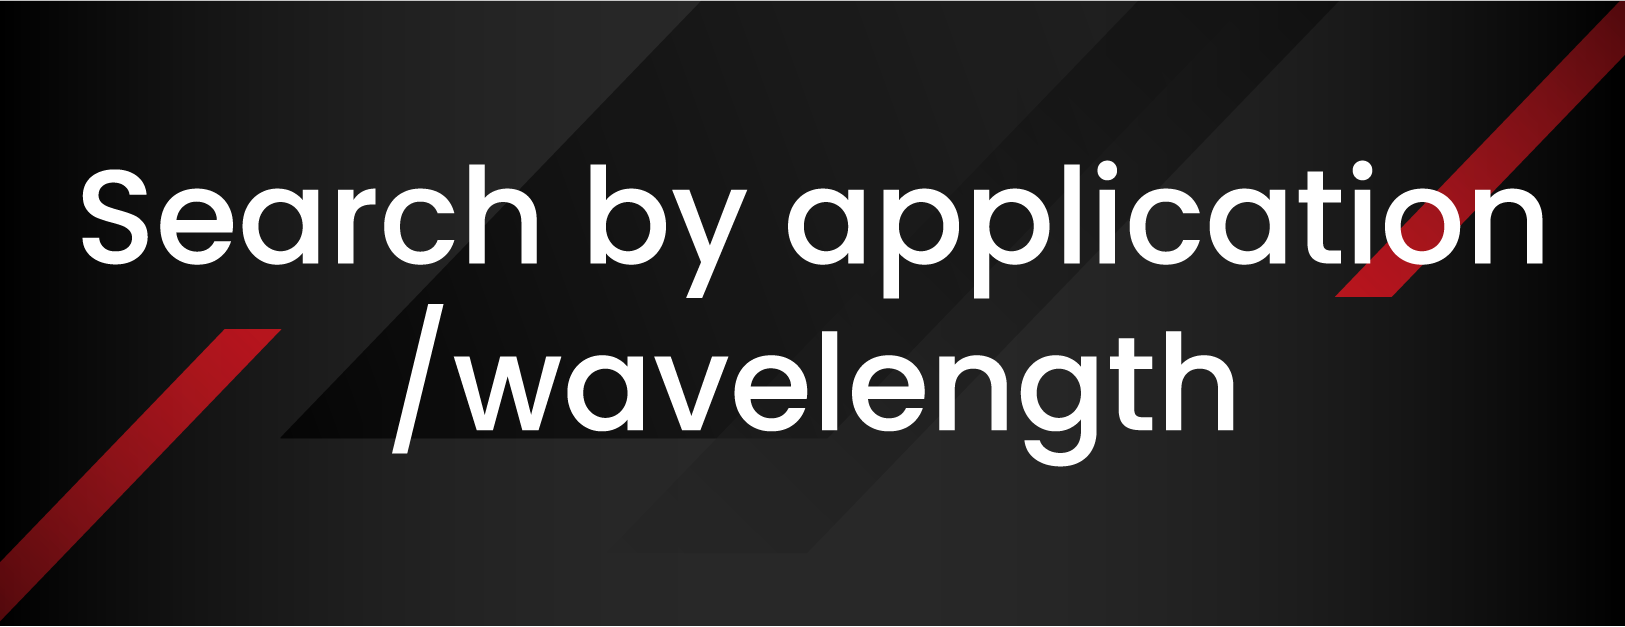 Search by application/wavelength